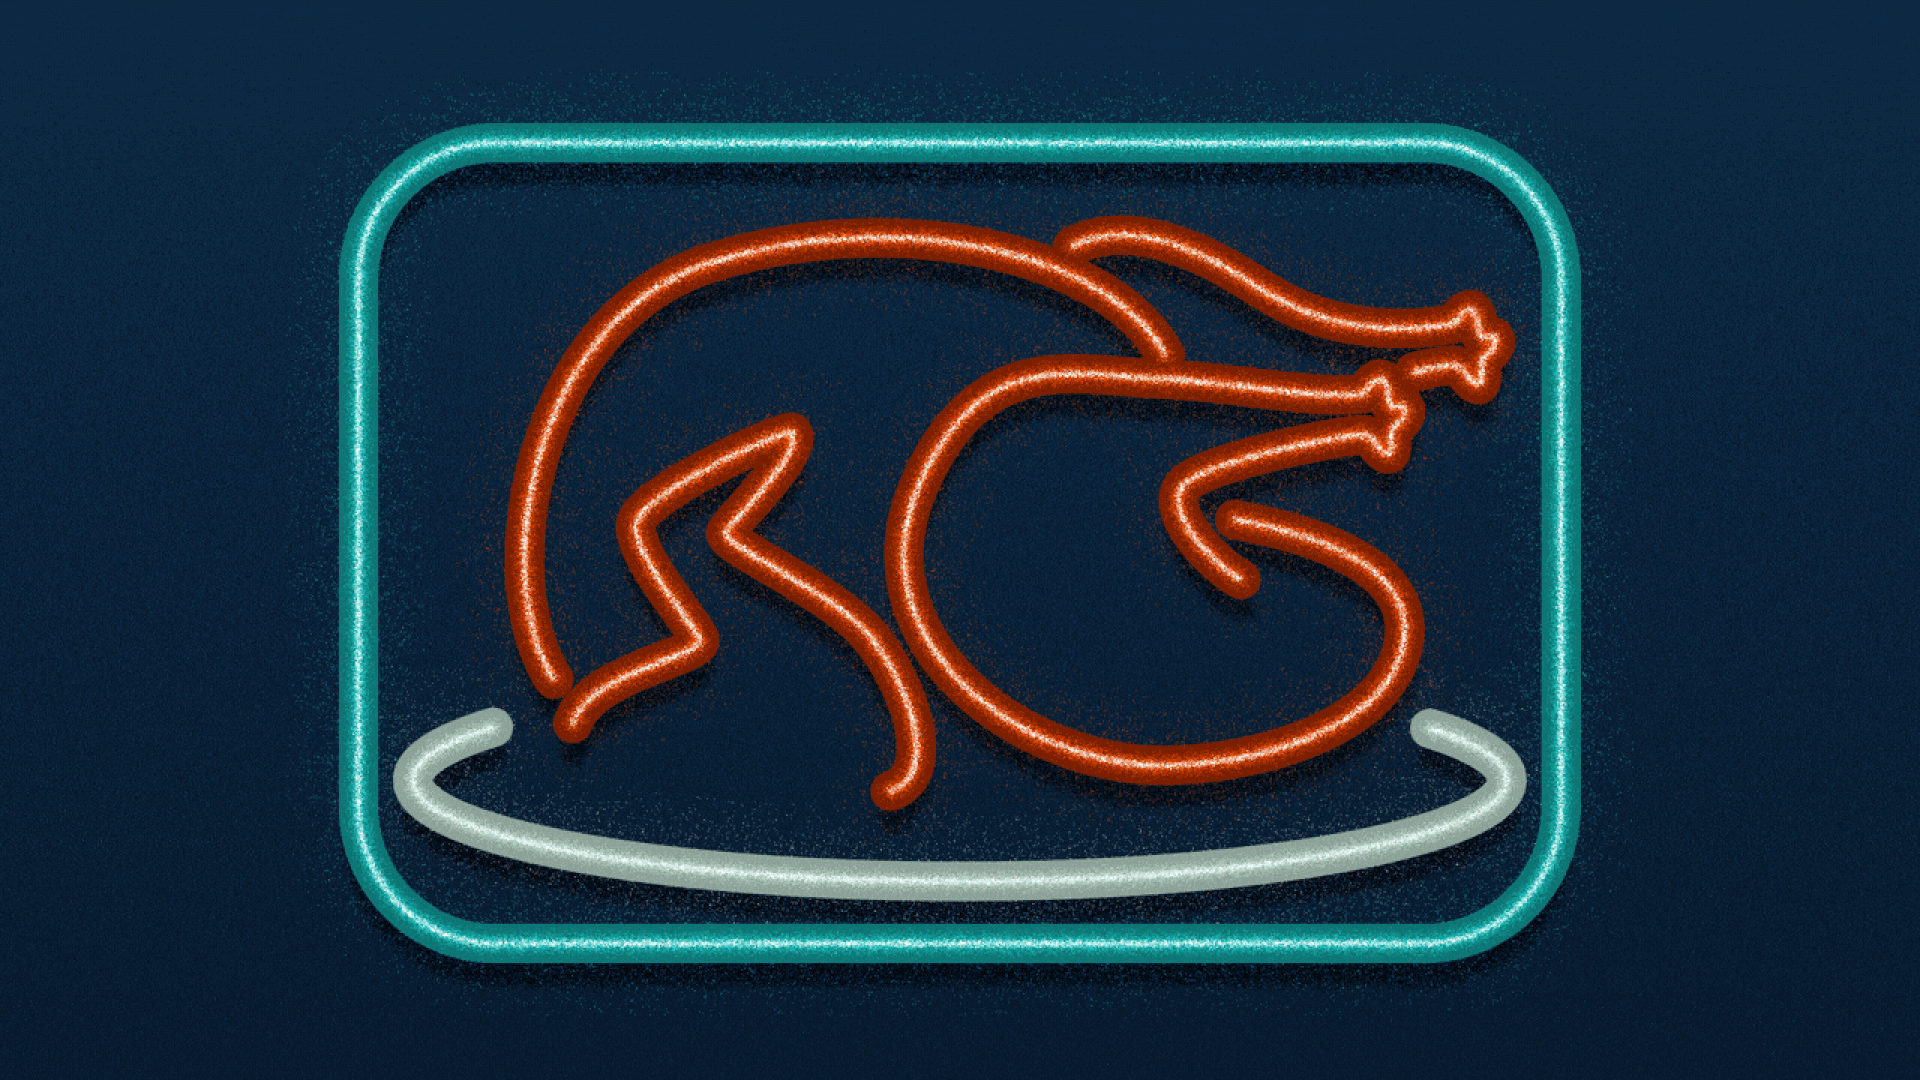 Illustration of a neon sign with a turkey in it lighting up and flickering.